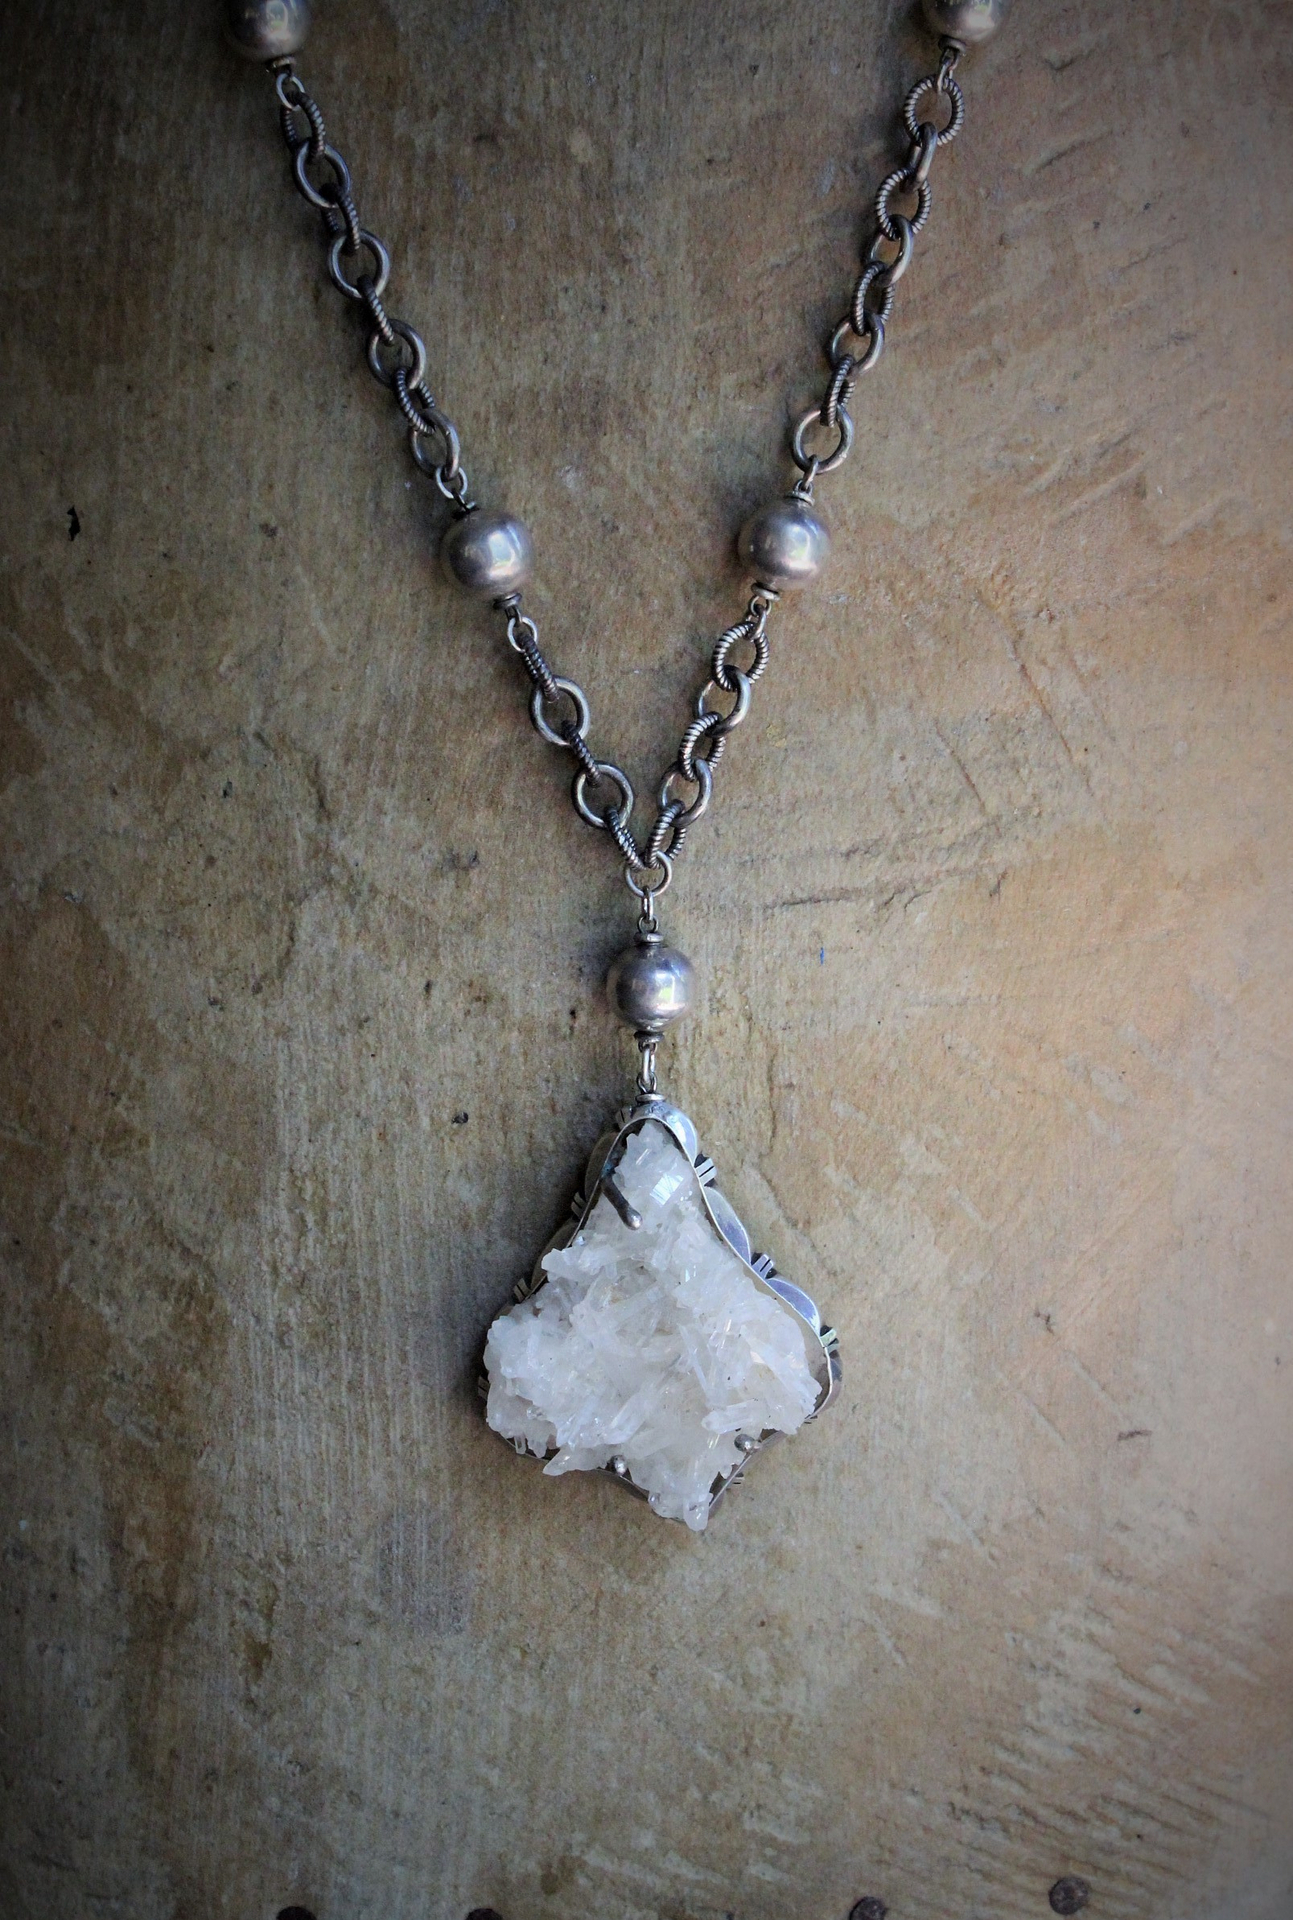 Vintage Taos Artisan Sterling Quartz Cluster Pendant Necklace with Sterling Beads, Chain & Clasp